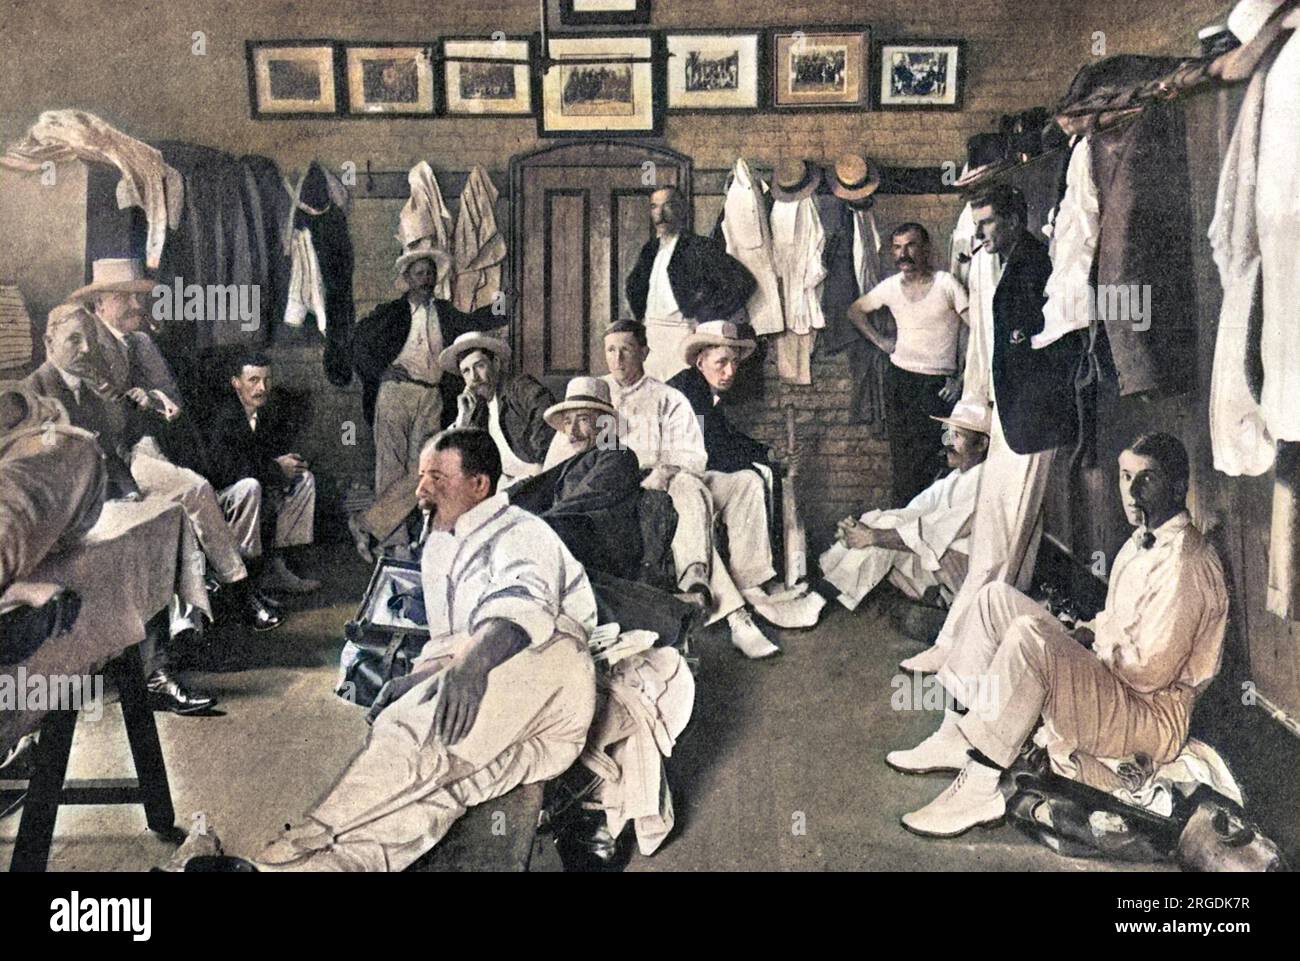 The Australian eleven in their dressing room on the Melbourne cricket ground.  In the right hand corner of the picture is C. Hill smoking a pipe.  Other players are M. A. Noble, W.P. Howell, R.A. Duff, C. McLeod, S.Gregory, J.J. Kelly and W.W. Armstrong. Stock Photo